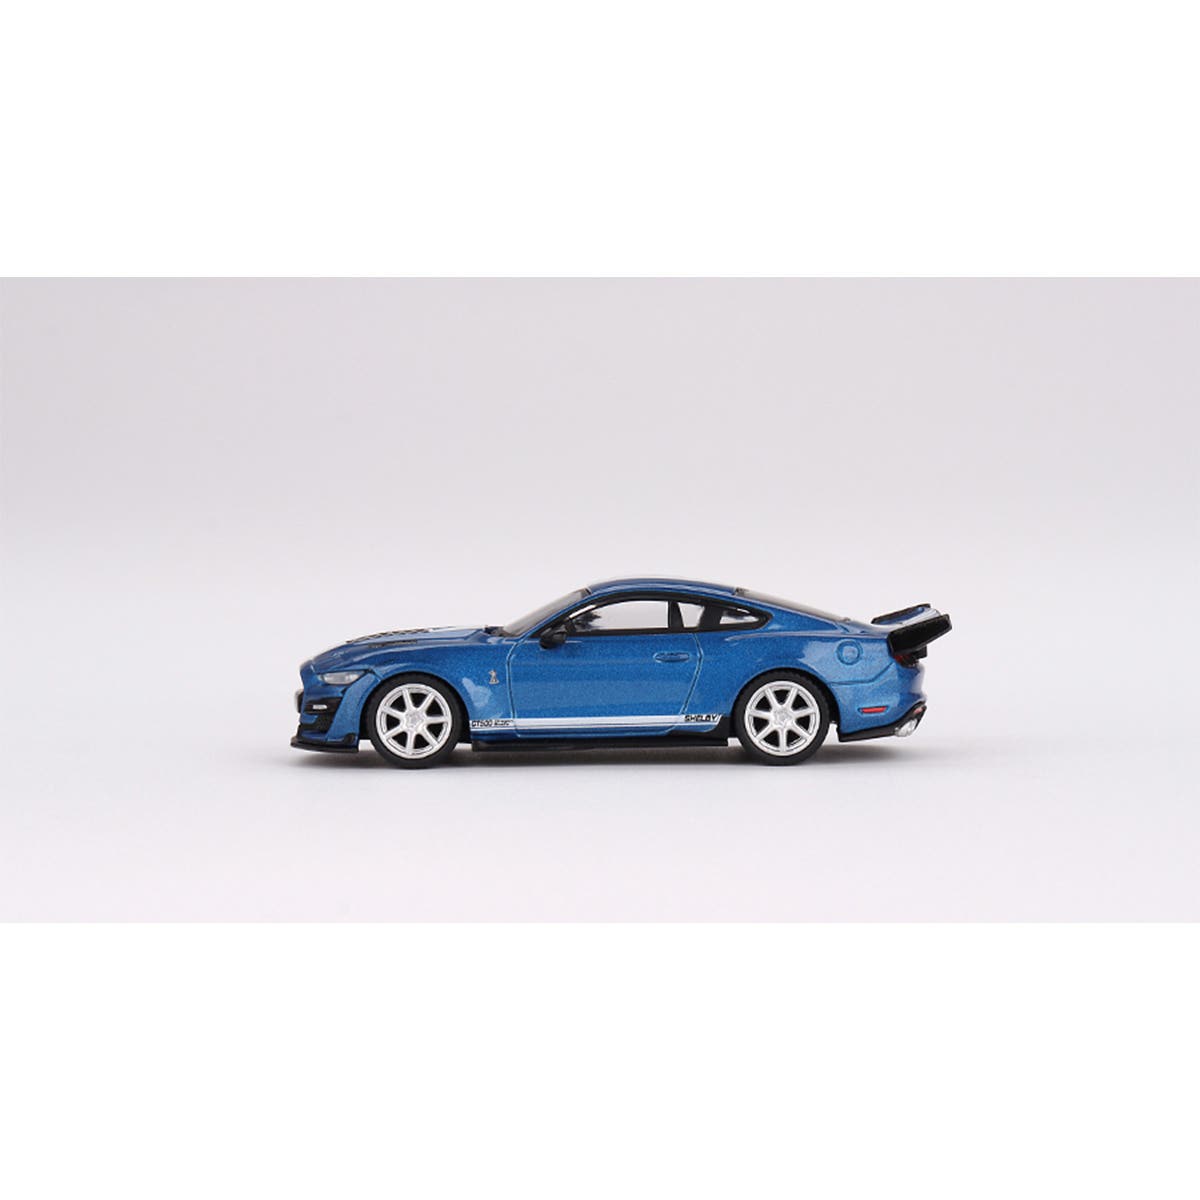 Shelby GT500 Dragon Snake Concept   Ford Performance Blue - 1:64 Scale Resin Model Car